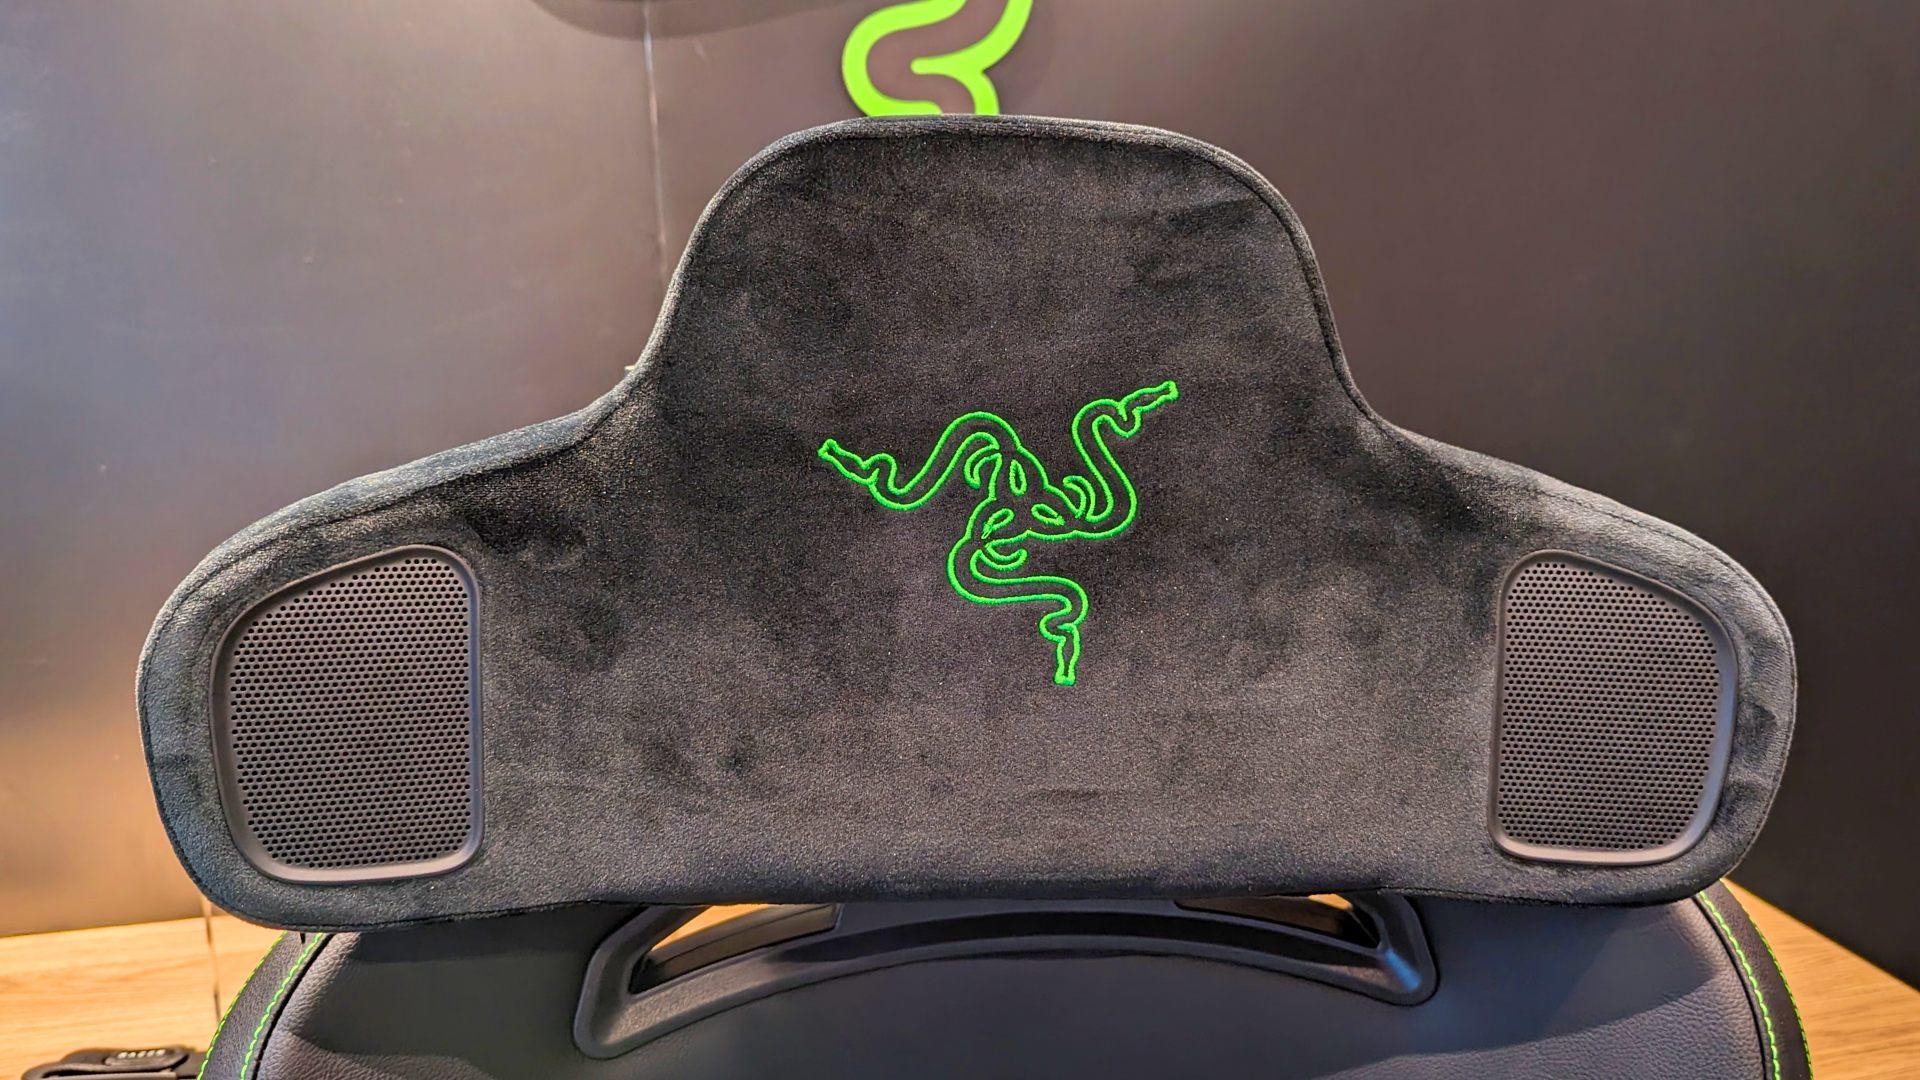 Razer's Project Carol gaming chair head cushion has speakers and